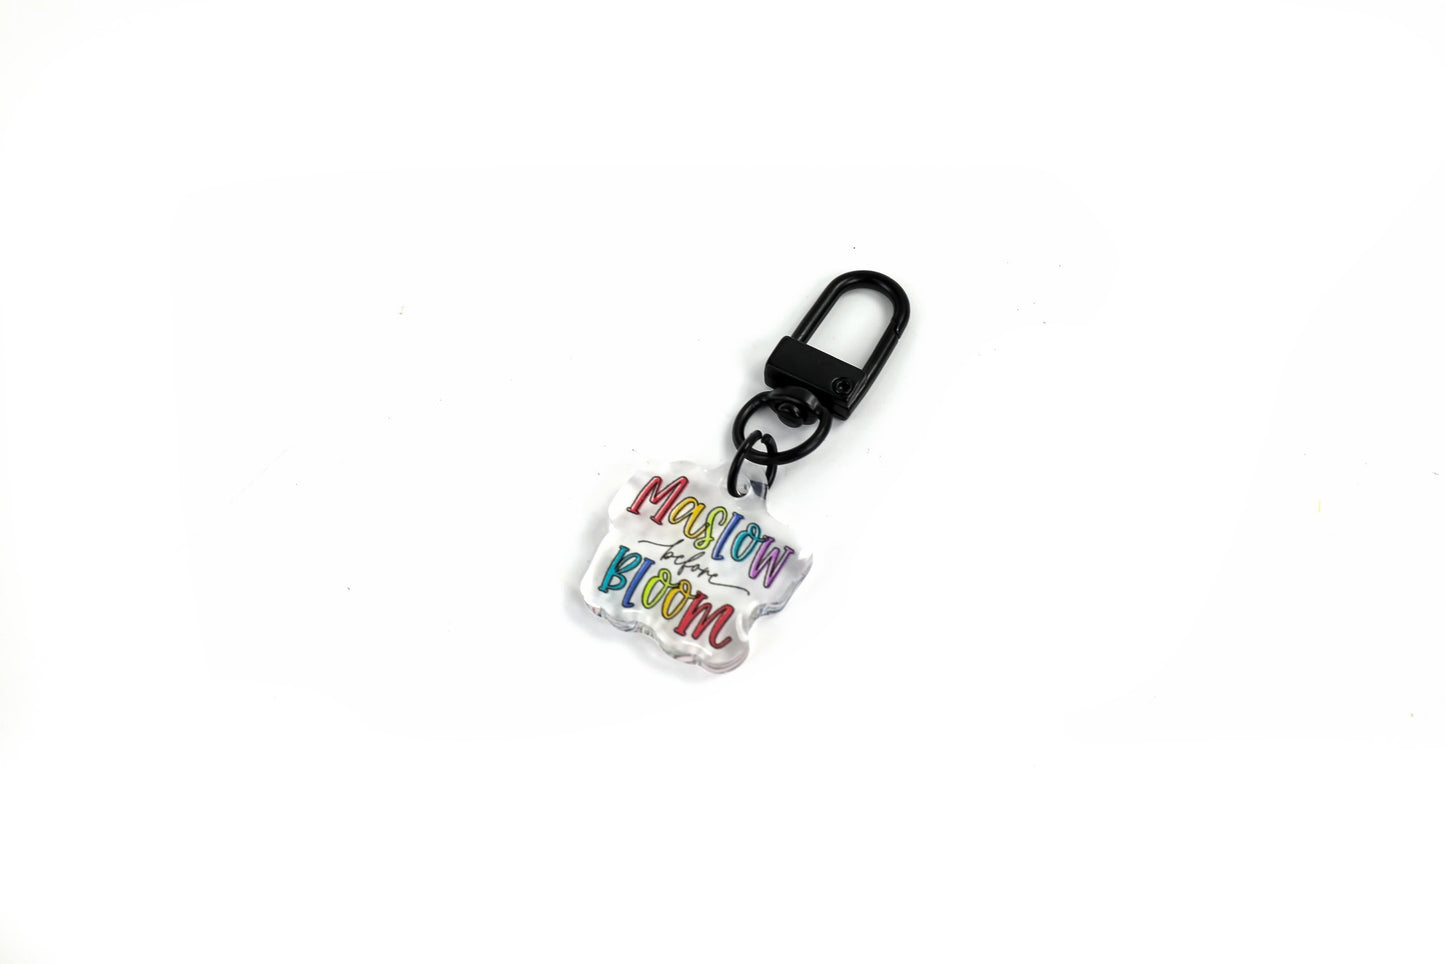 Maslow Before Bloom Badge Charm